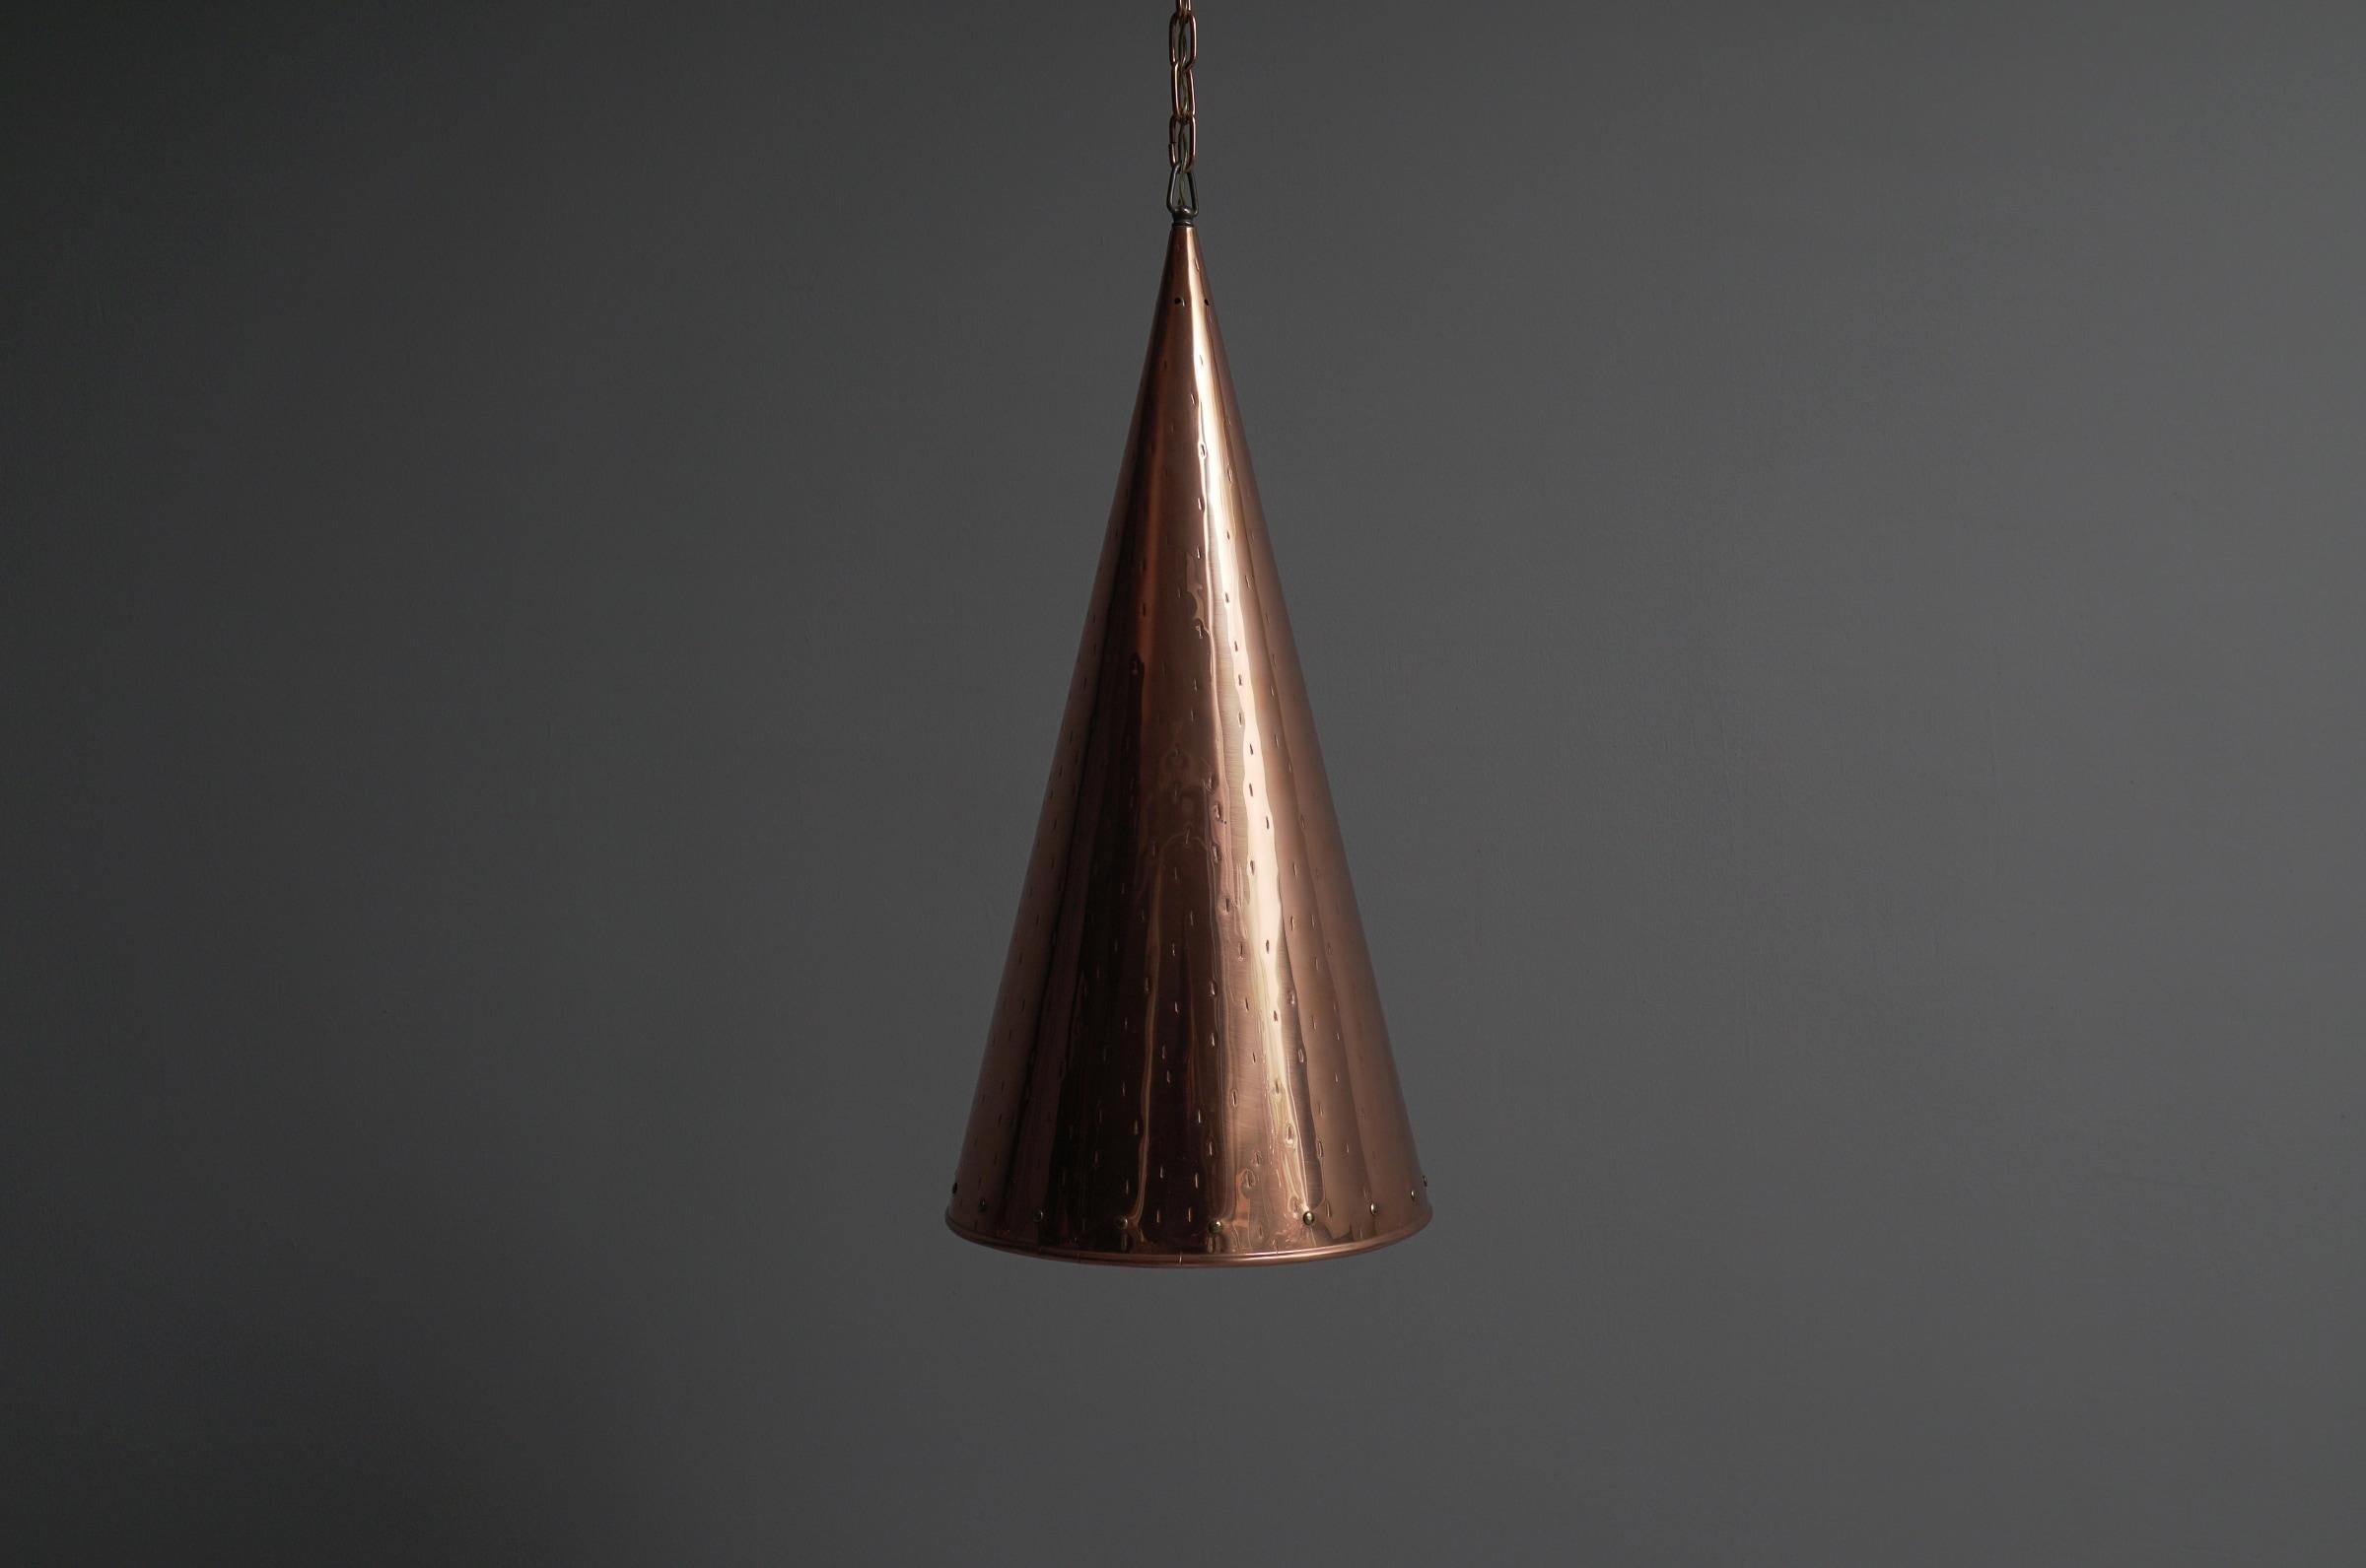 Hammered Copper Cone Pendant Lamps by E.S Horn Aalestrup, 1950s Denmark For Sale 5